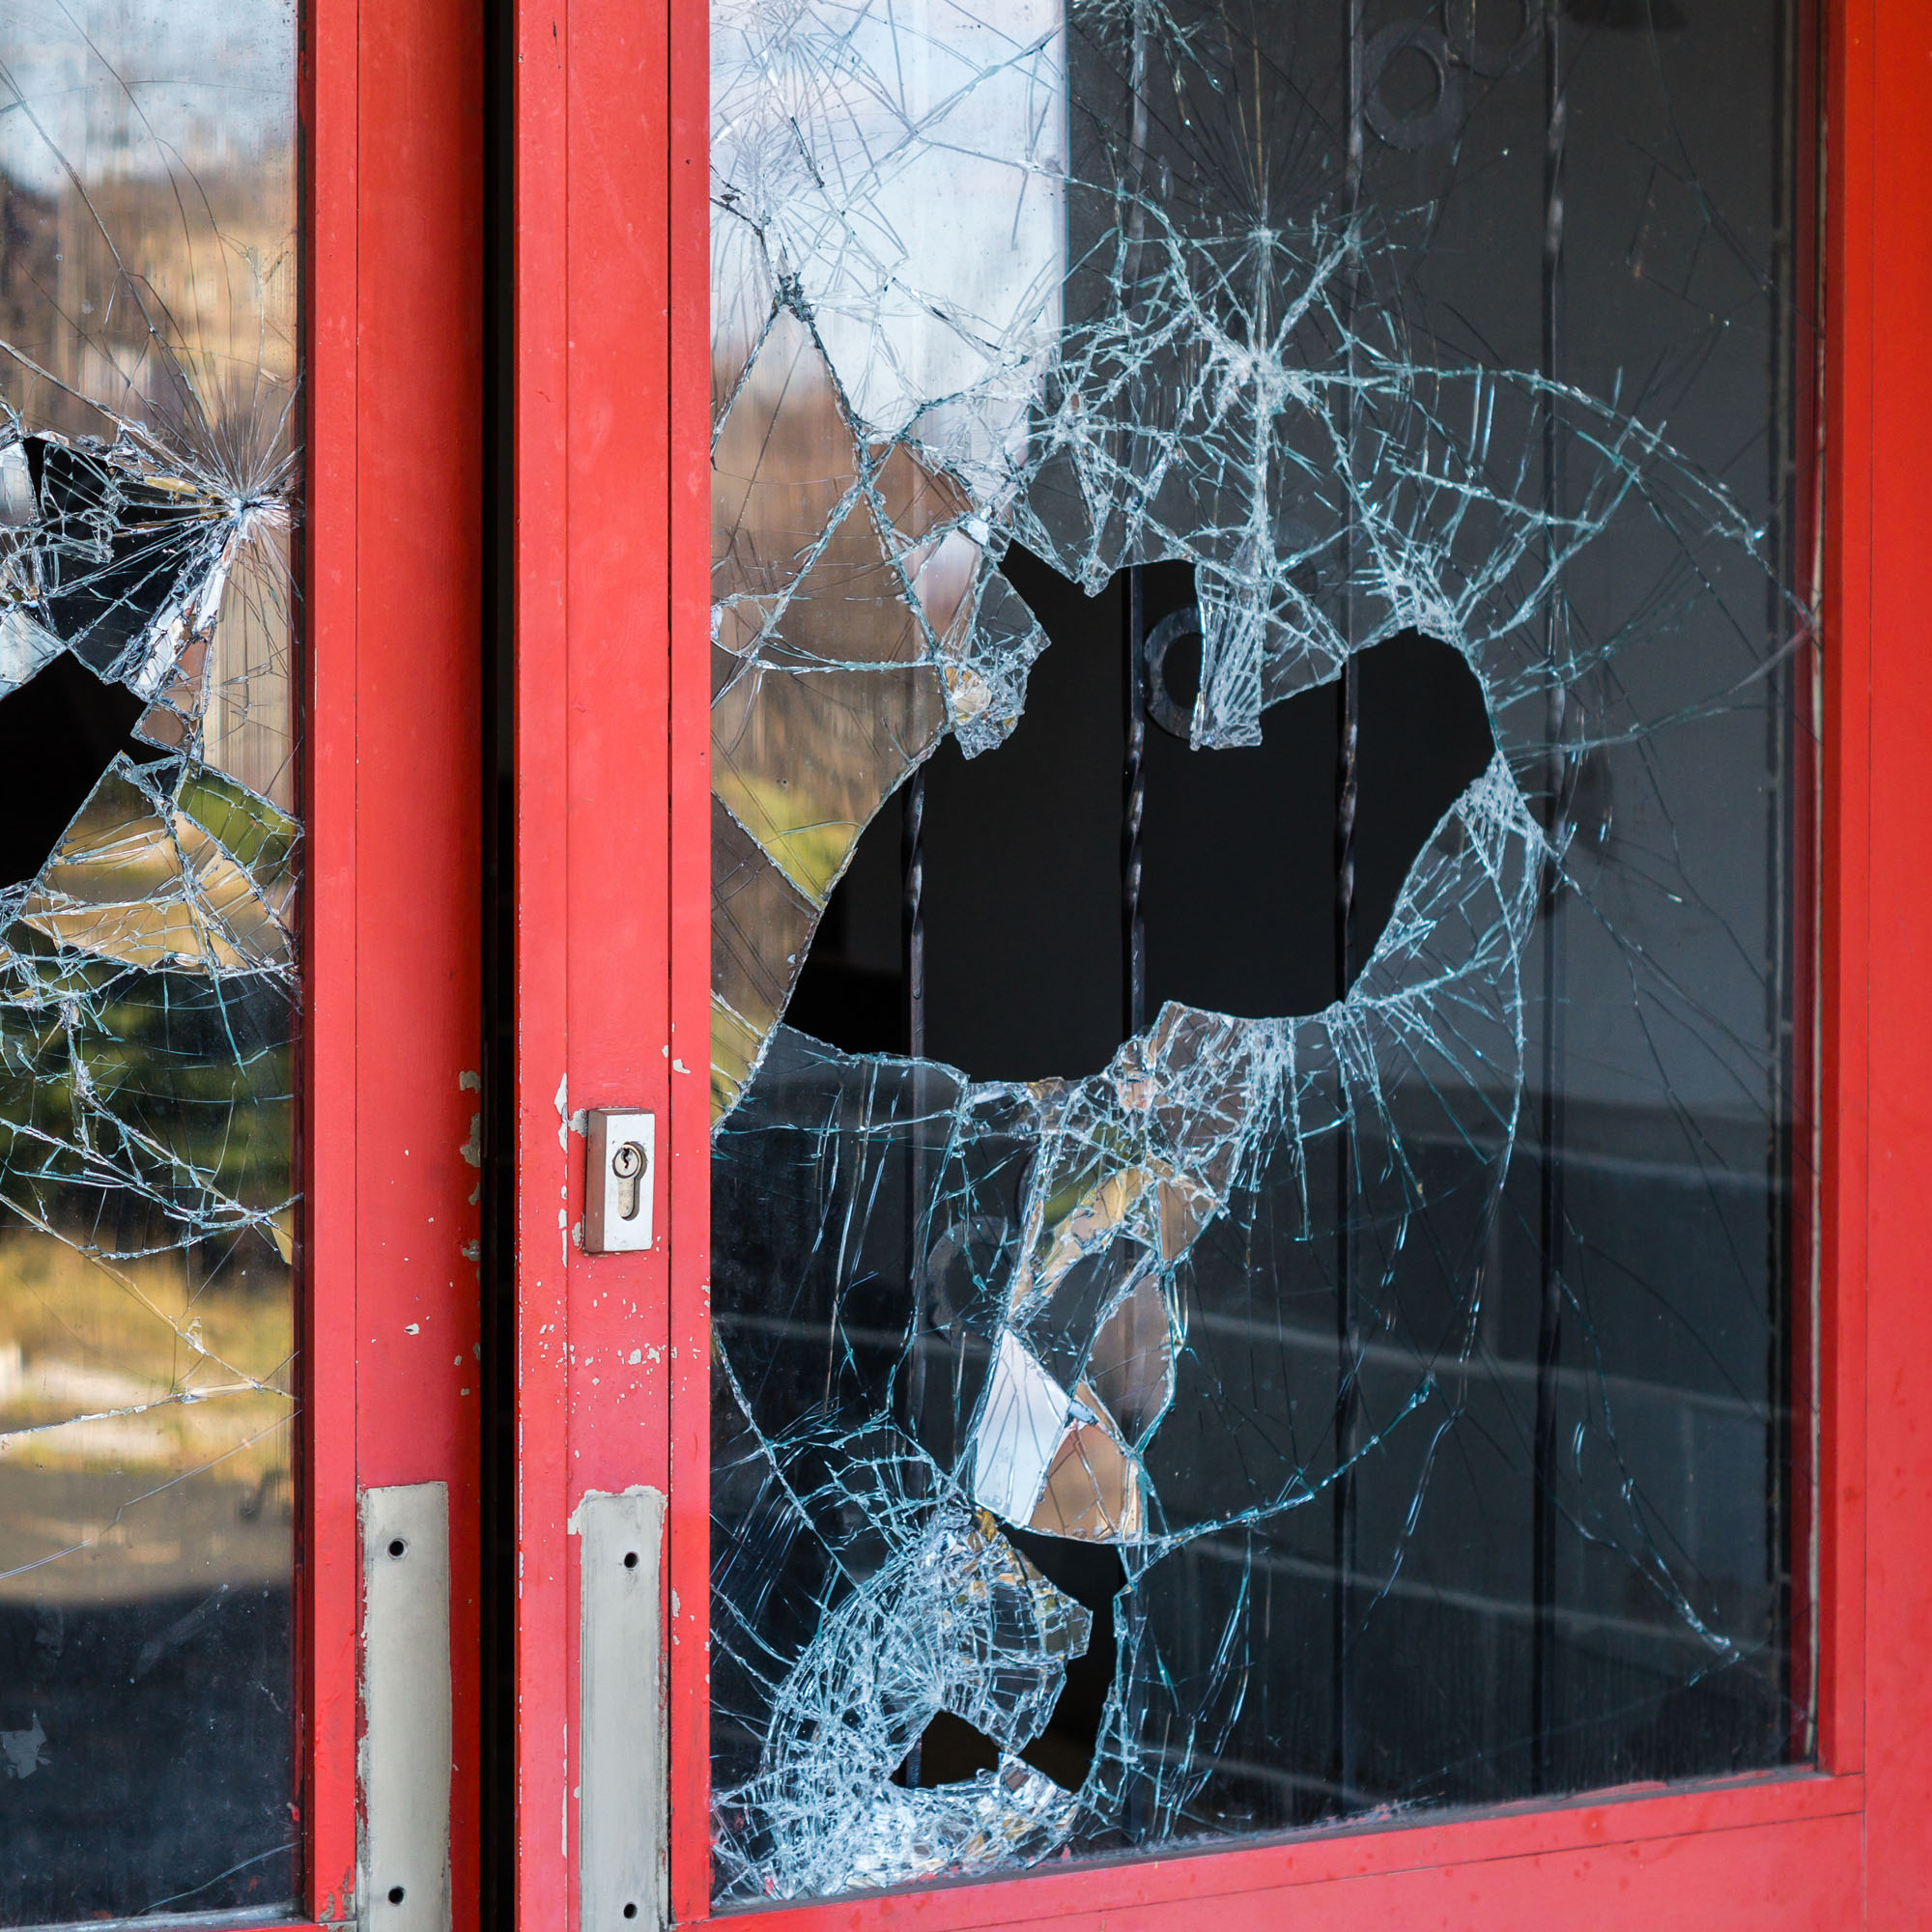 Home or business has been burglarized with window broken as the entry point